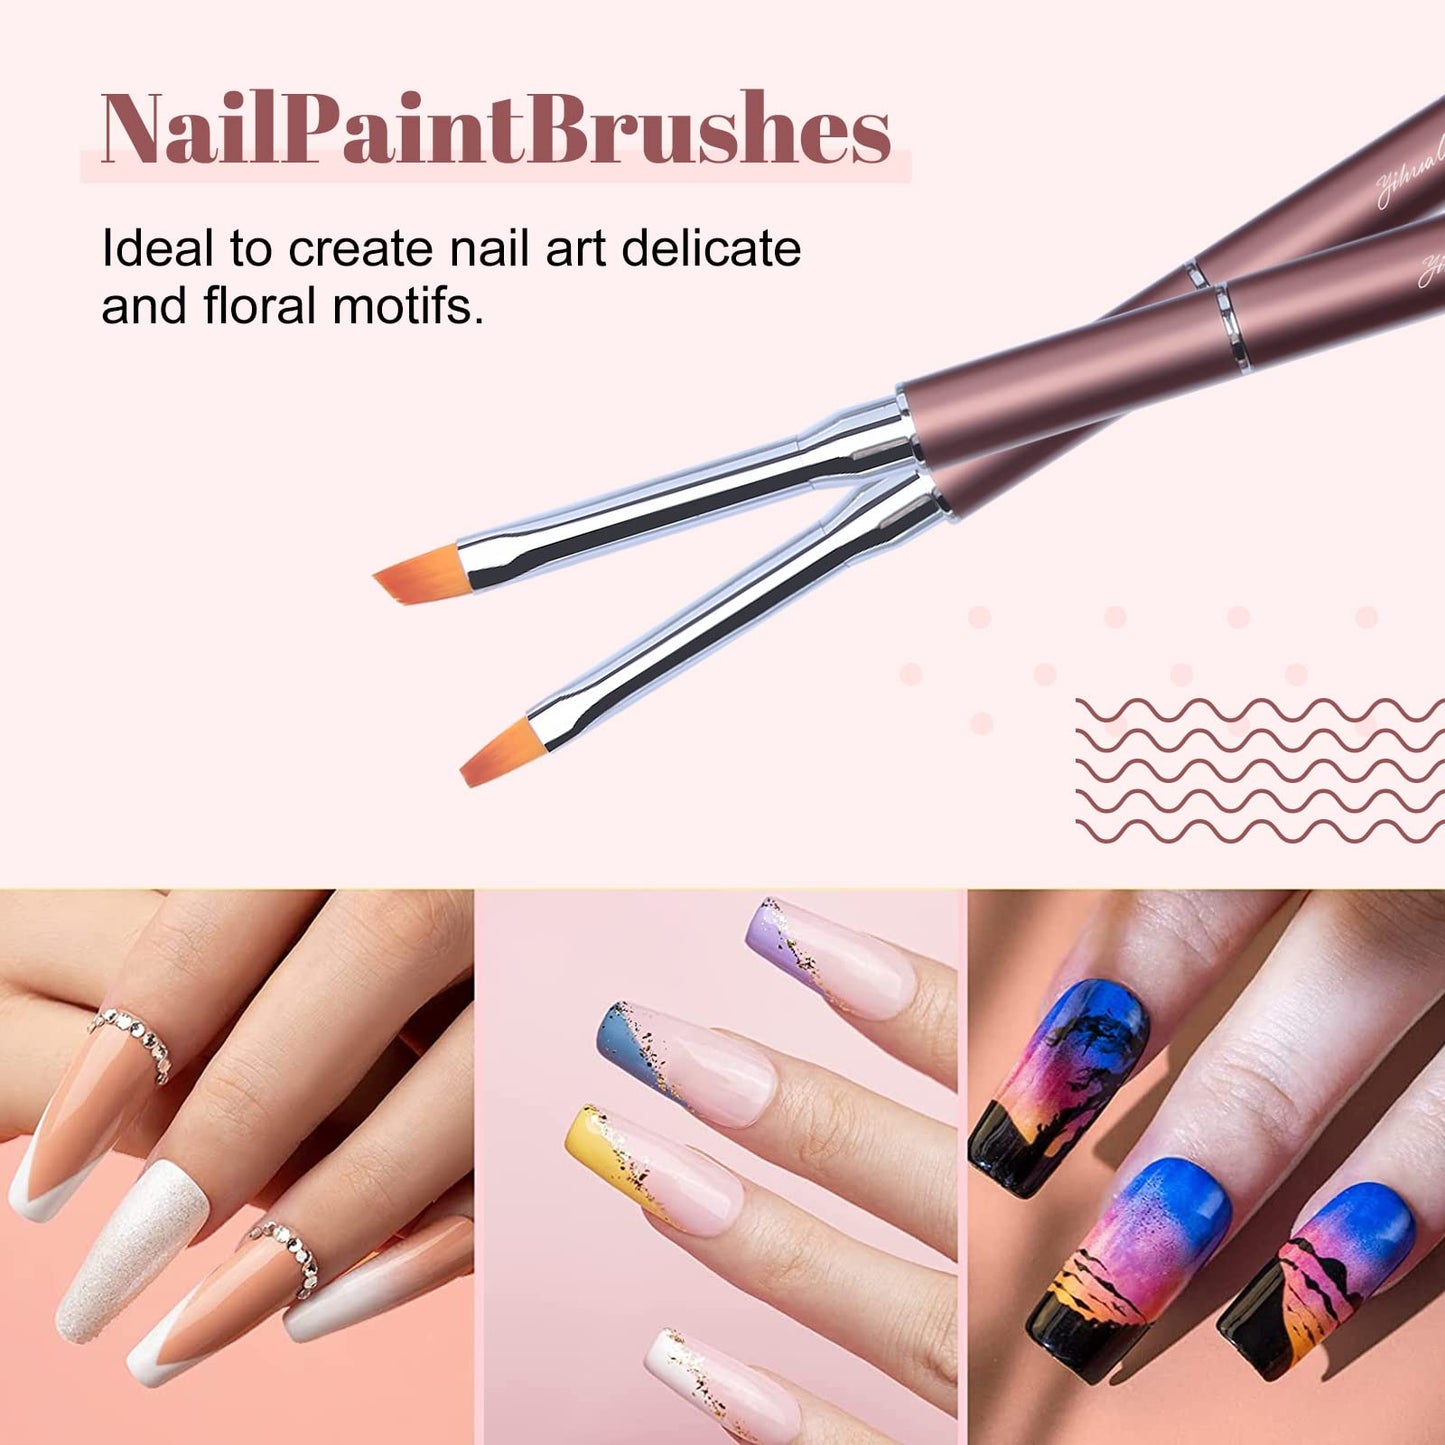 Nail Art Brushes Set, YIHUELE Nail Art Design Painting Tools with Nail Extension Gel Brush, Nail Art Liner Brush for Gel Polish Manicure Salon DIY at Home (Coffee)